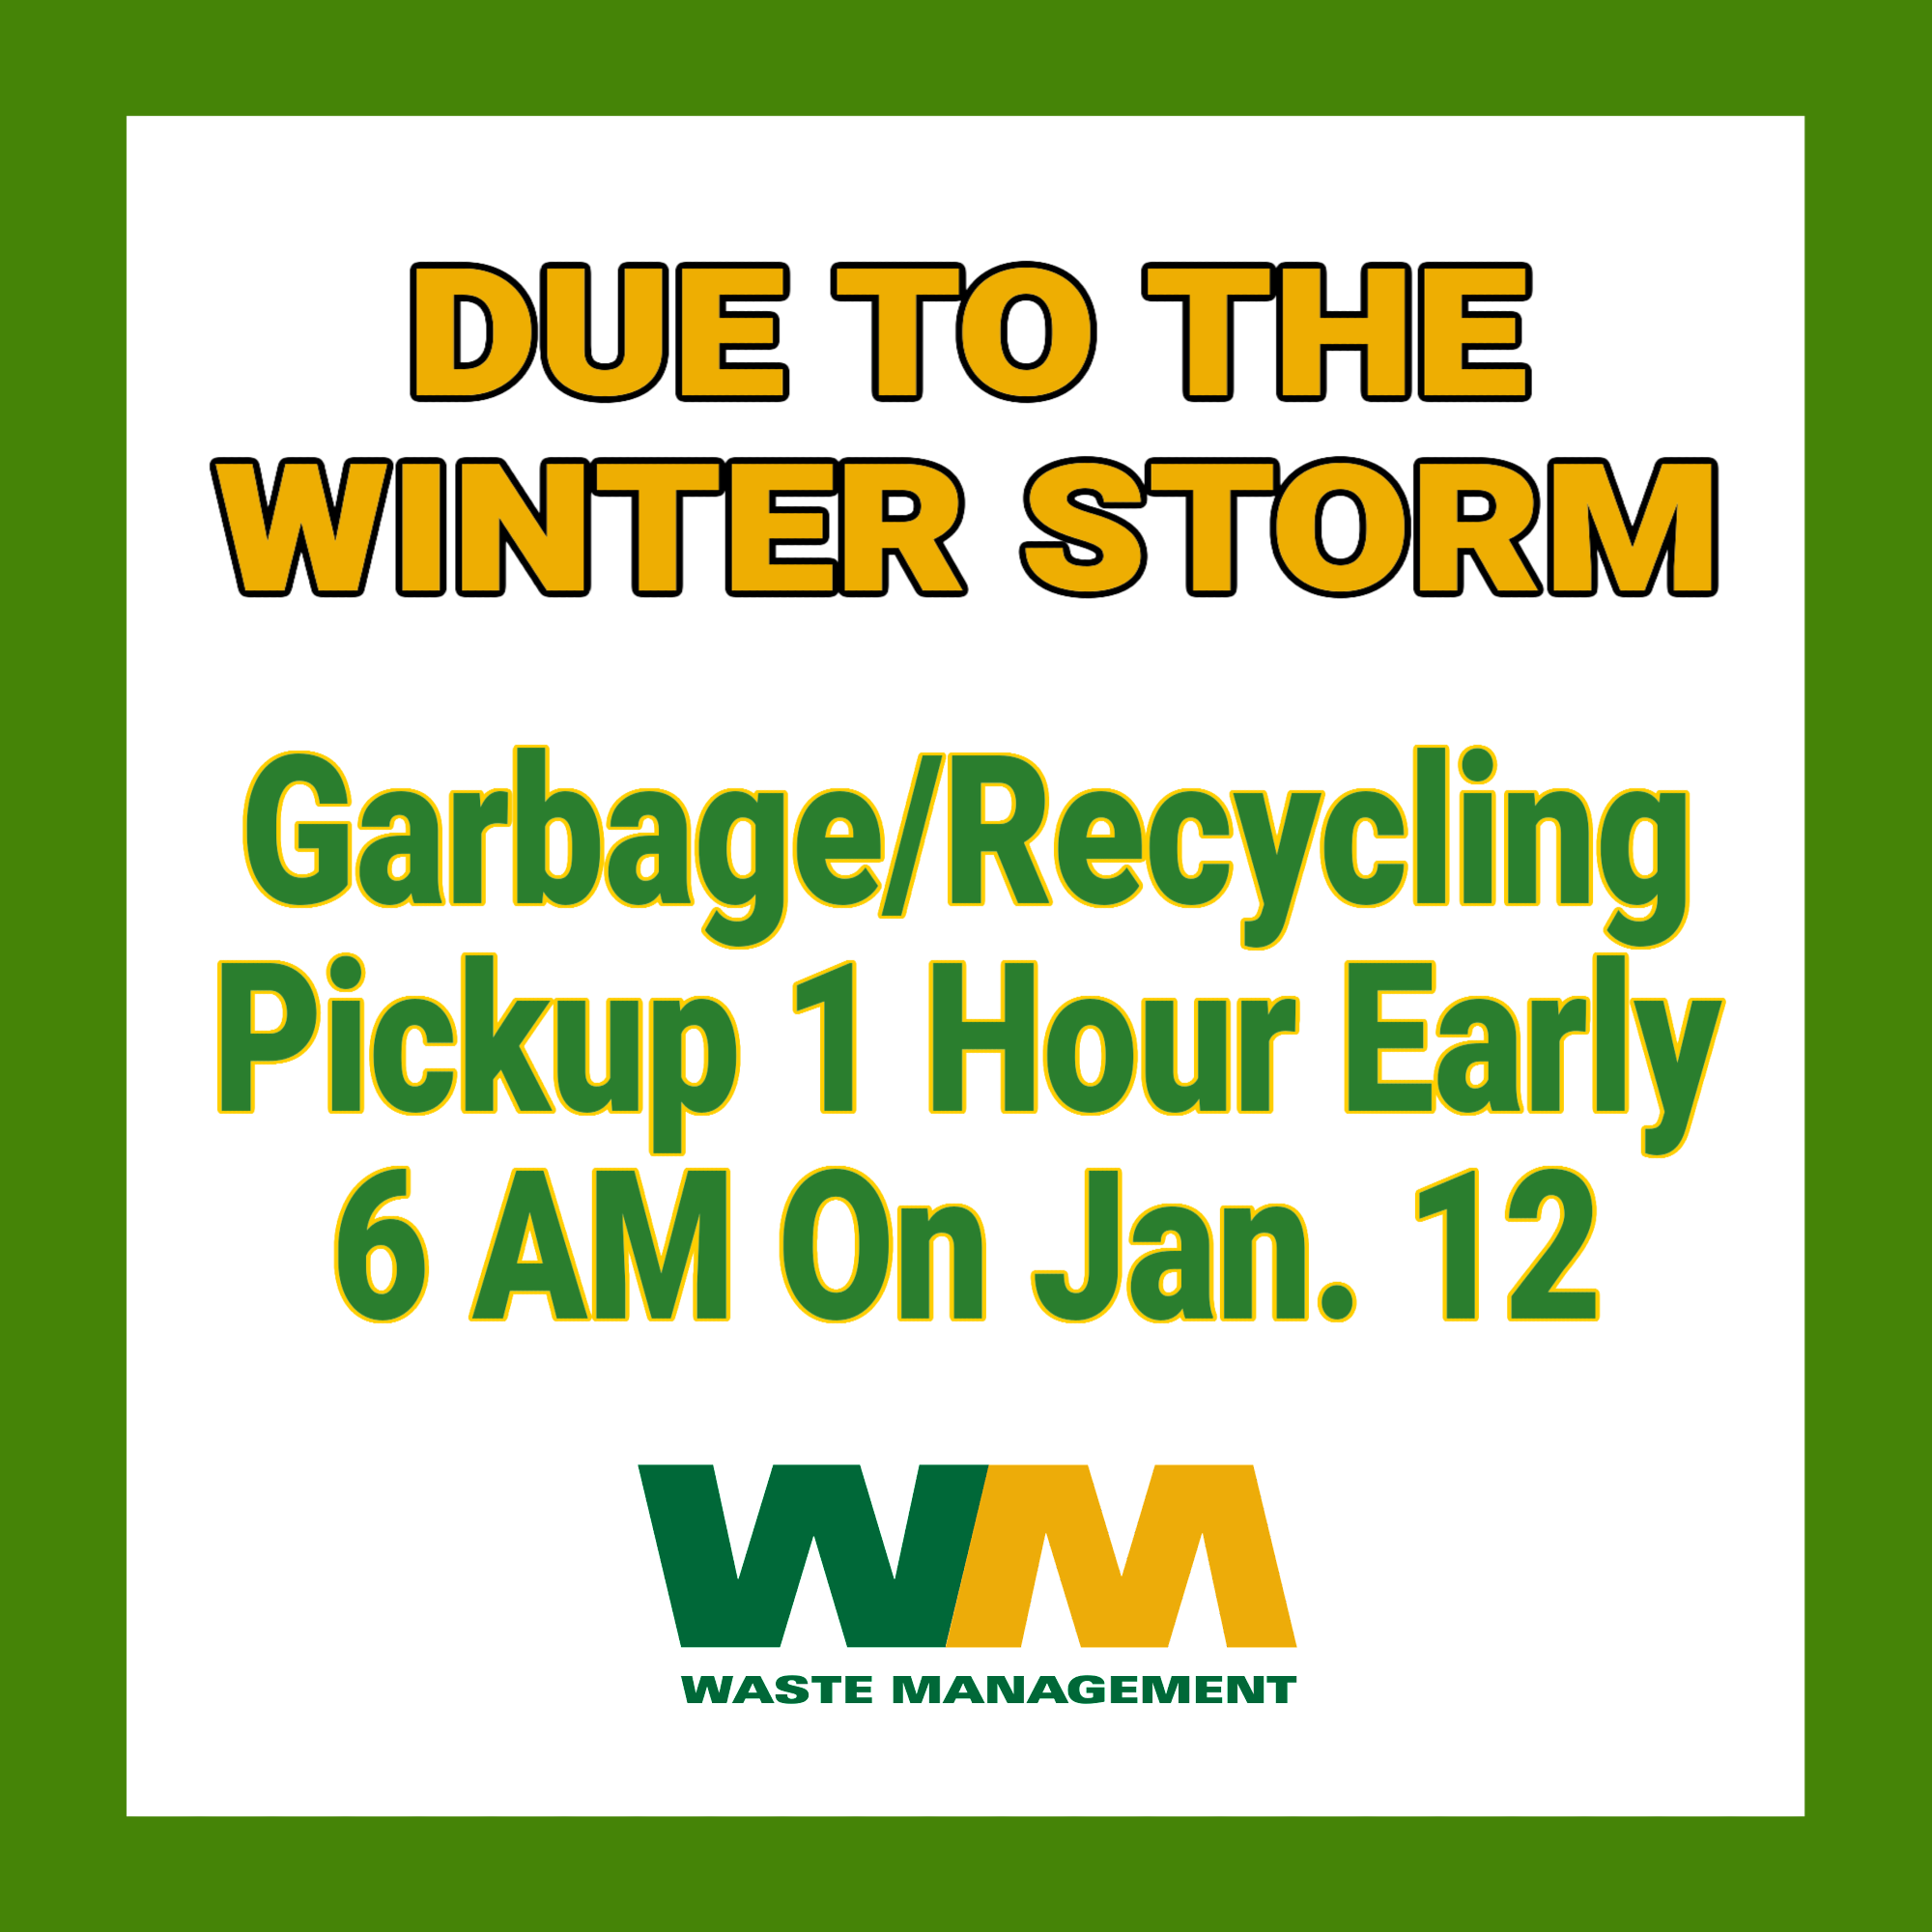 Garbage/Recycling Early Pickup On Jan. Village of Westmont